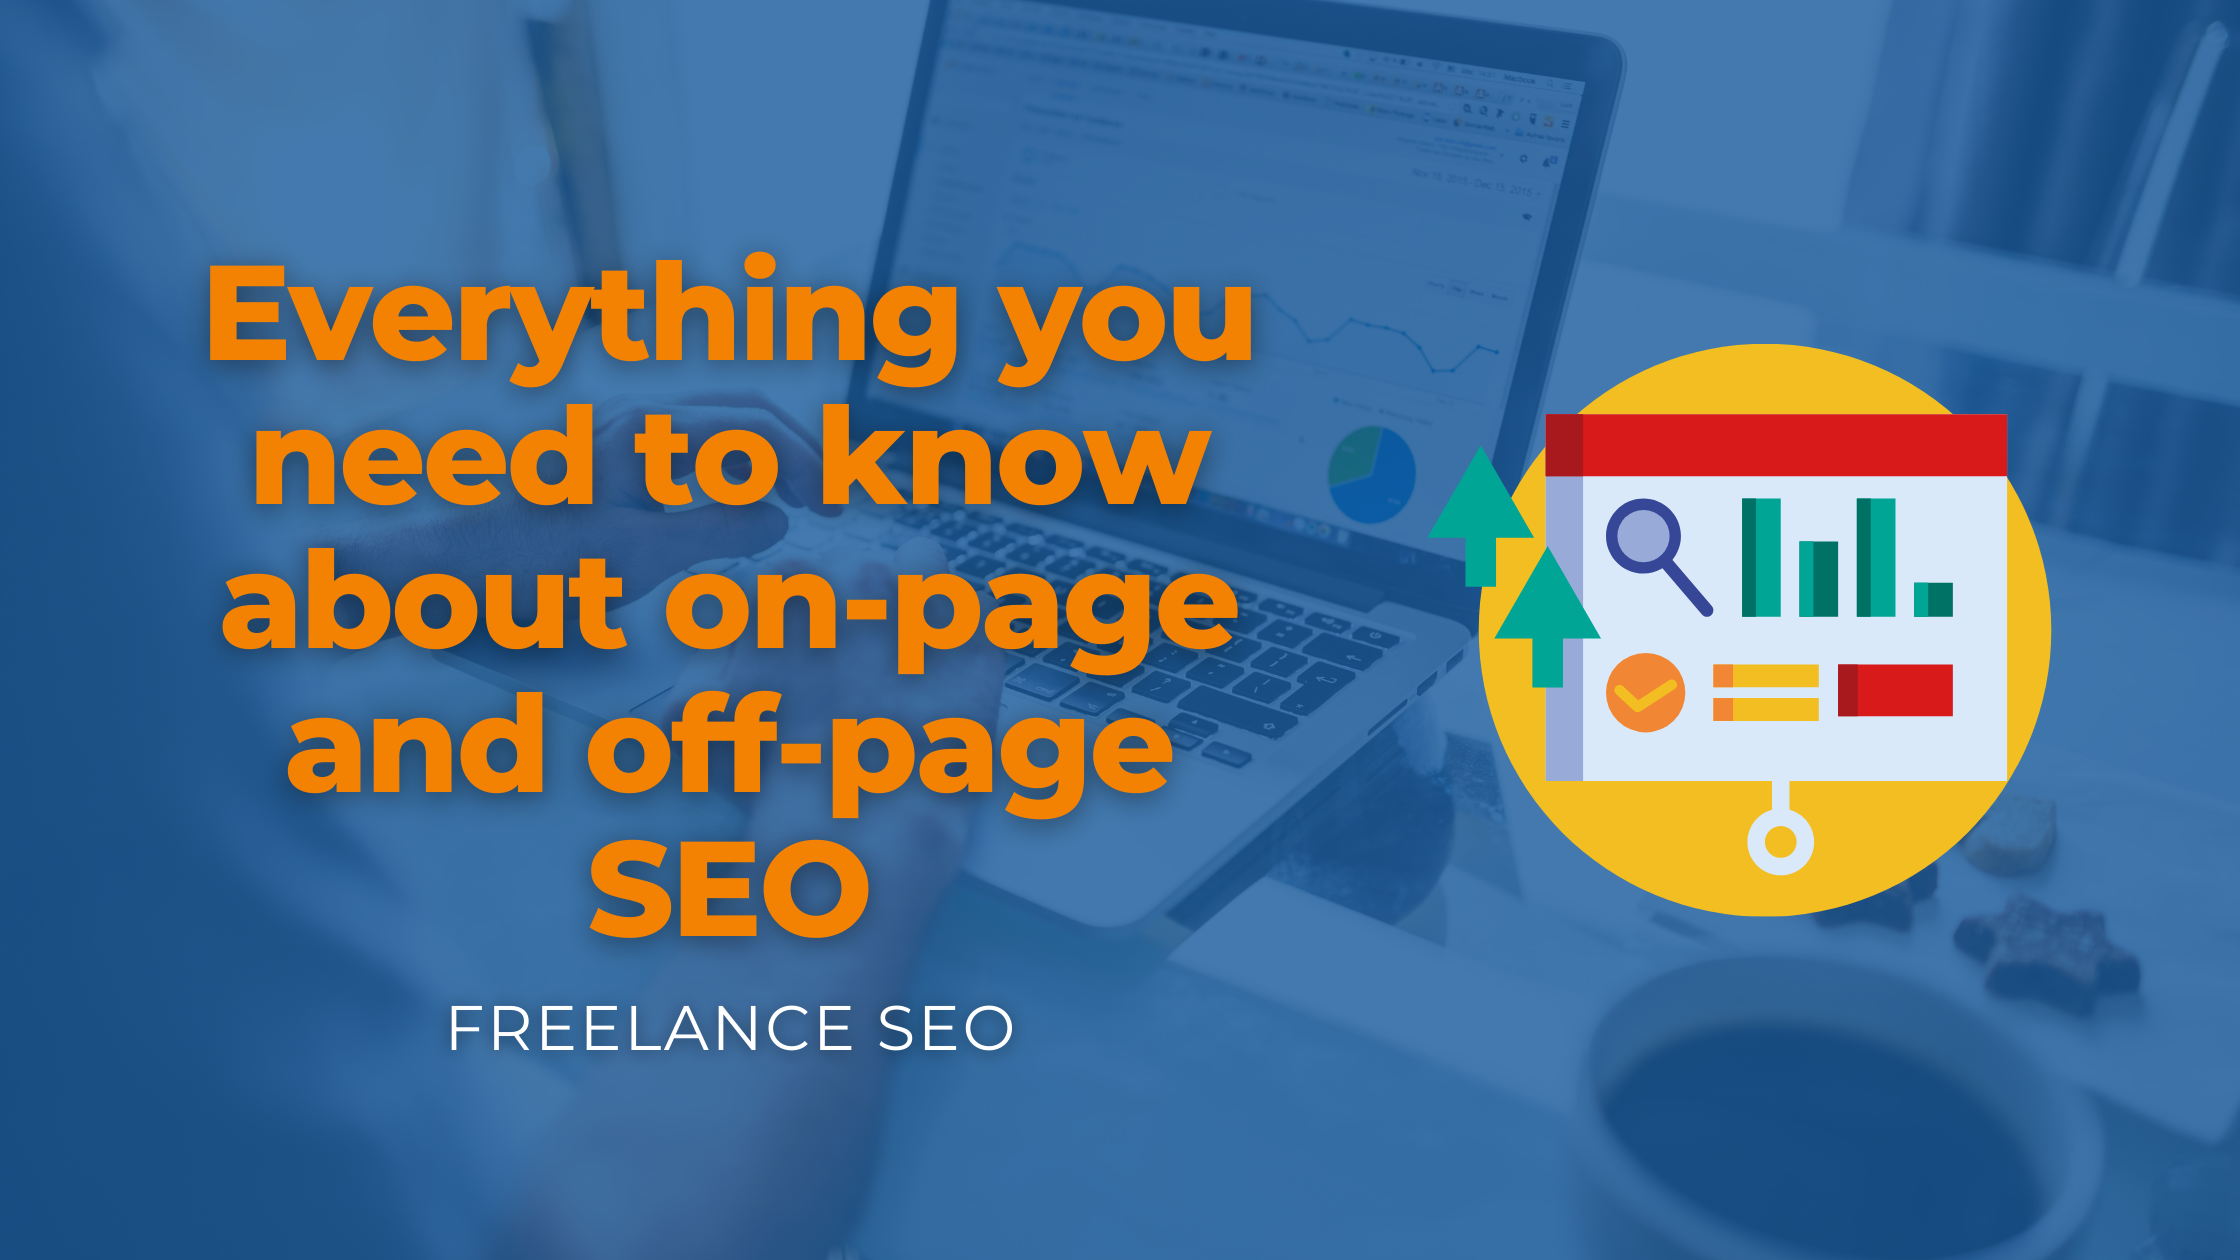 Everything you need to know about on-page and off-page SEO